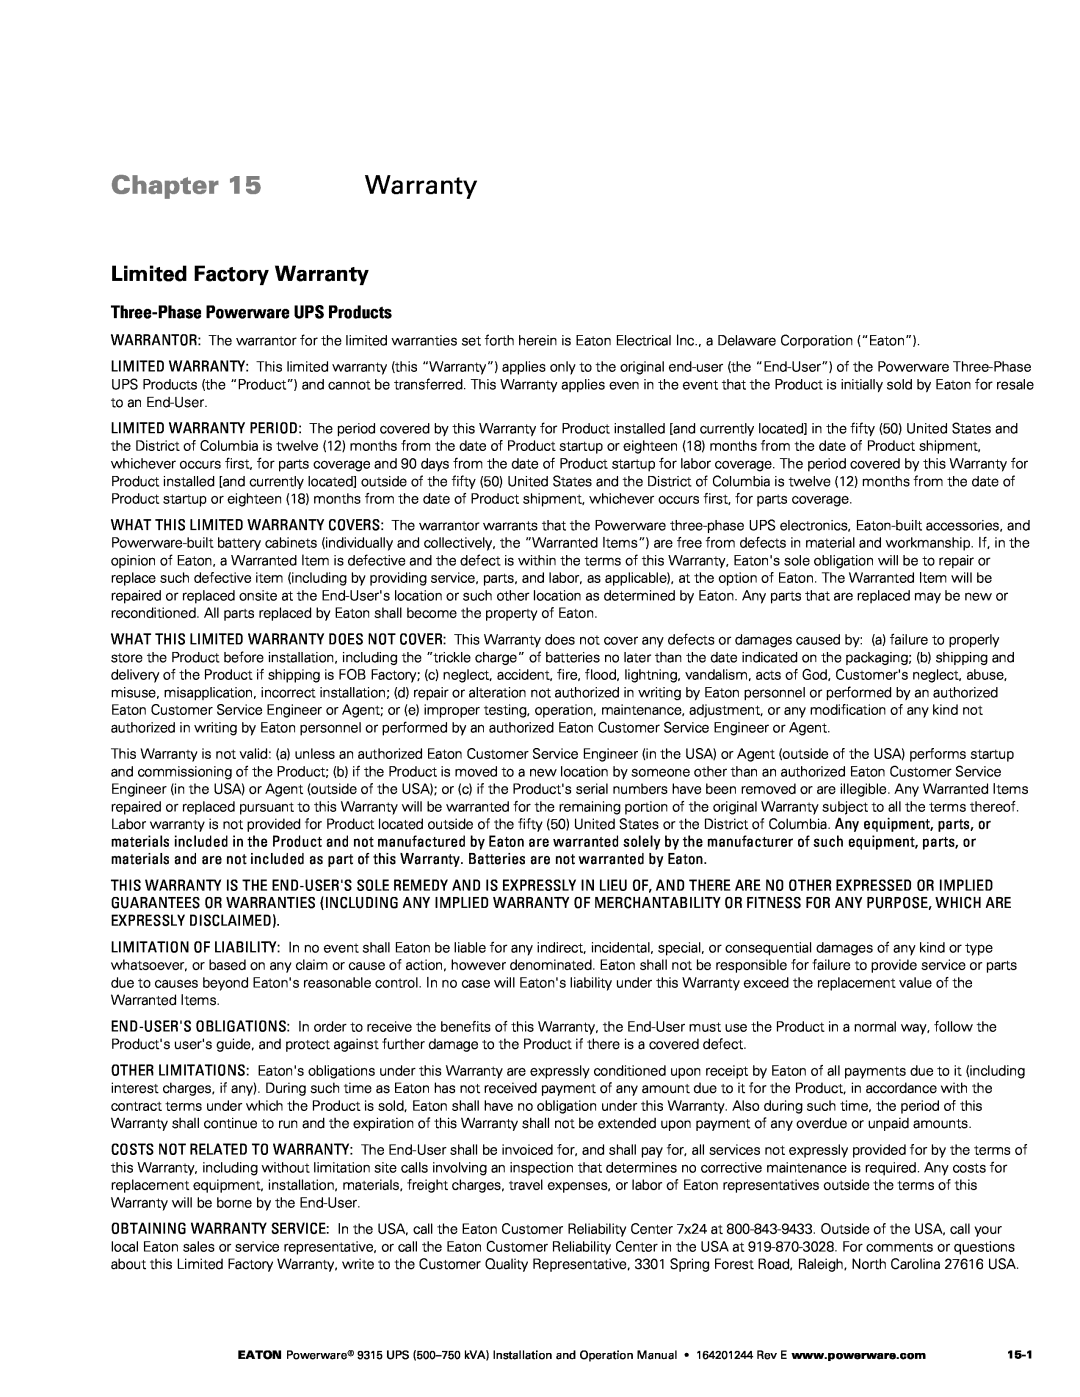 Powerware Powerware 9315 operation manual Limited Factory Warranty, Three‐Phase Powerware UPS Products, Chapter 